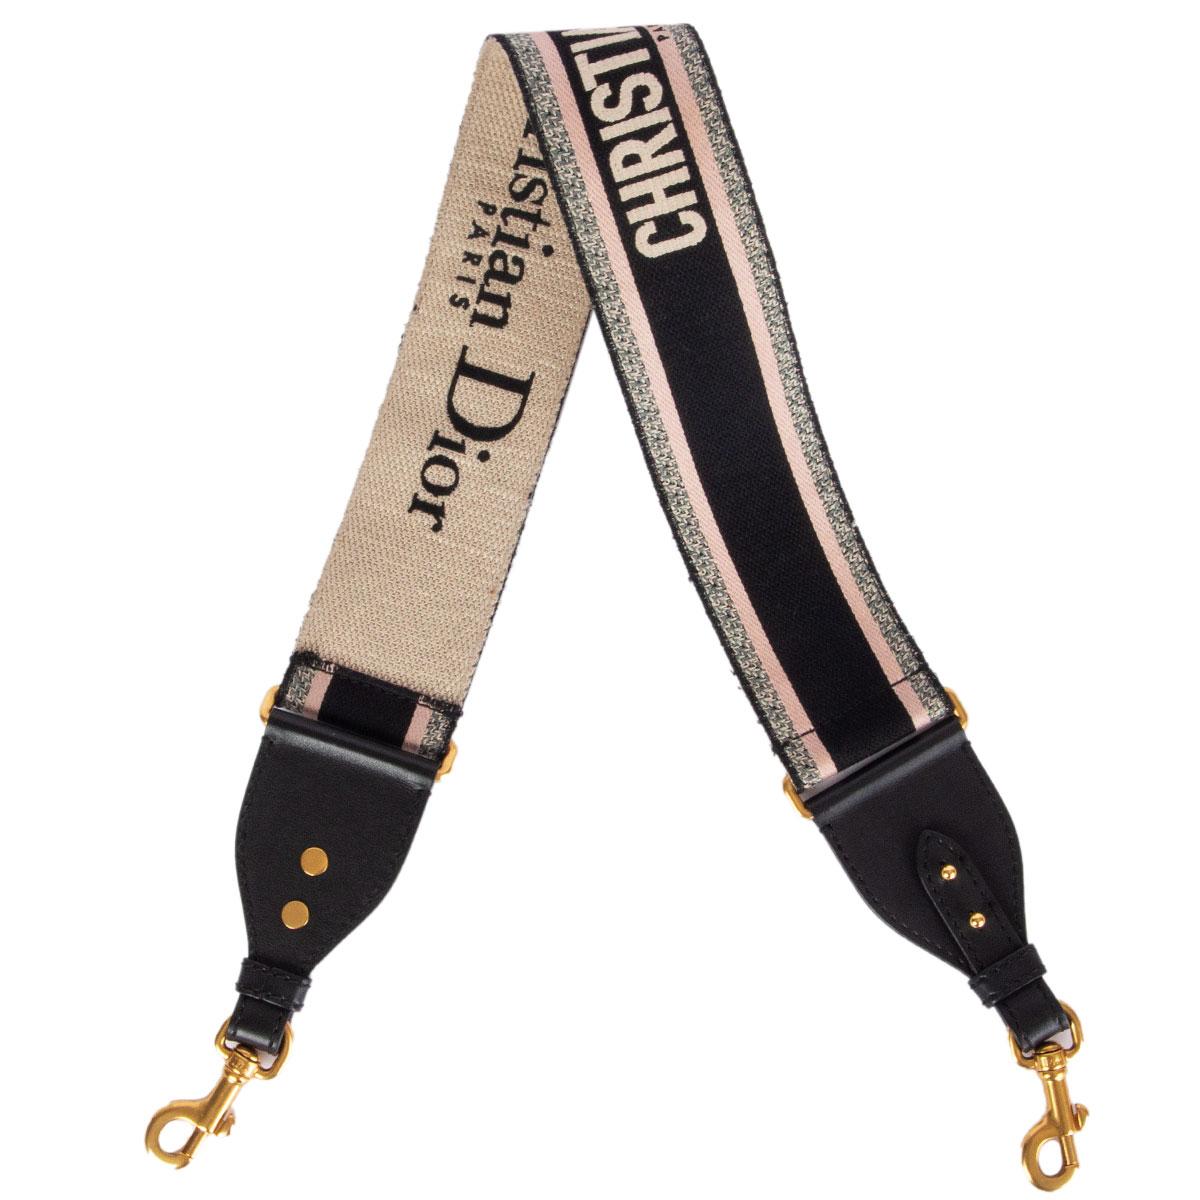 100% authentic Christian Dior embroidered shoulder-strap in pale rose, light grey, black and sand canvas is characterized by a bold ‘Christian Dior’ signature. Crafted using a fully embroidered technique, the strap is a way to customize and add a